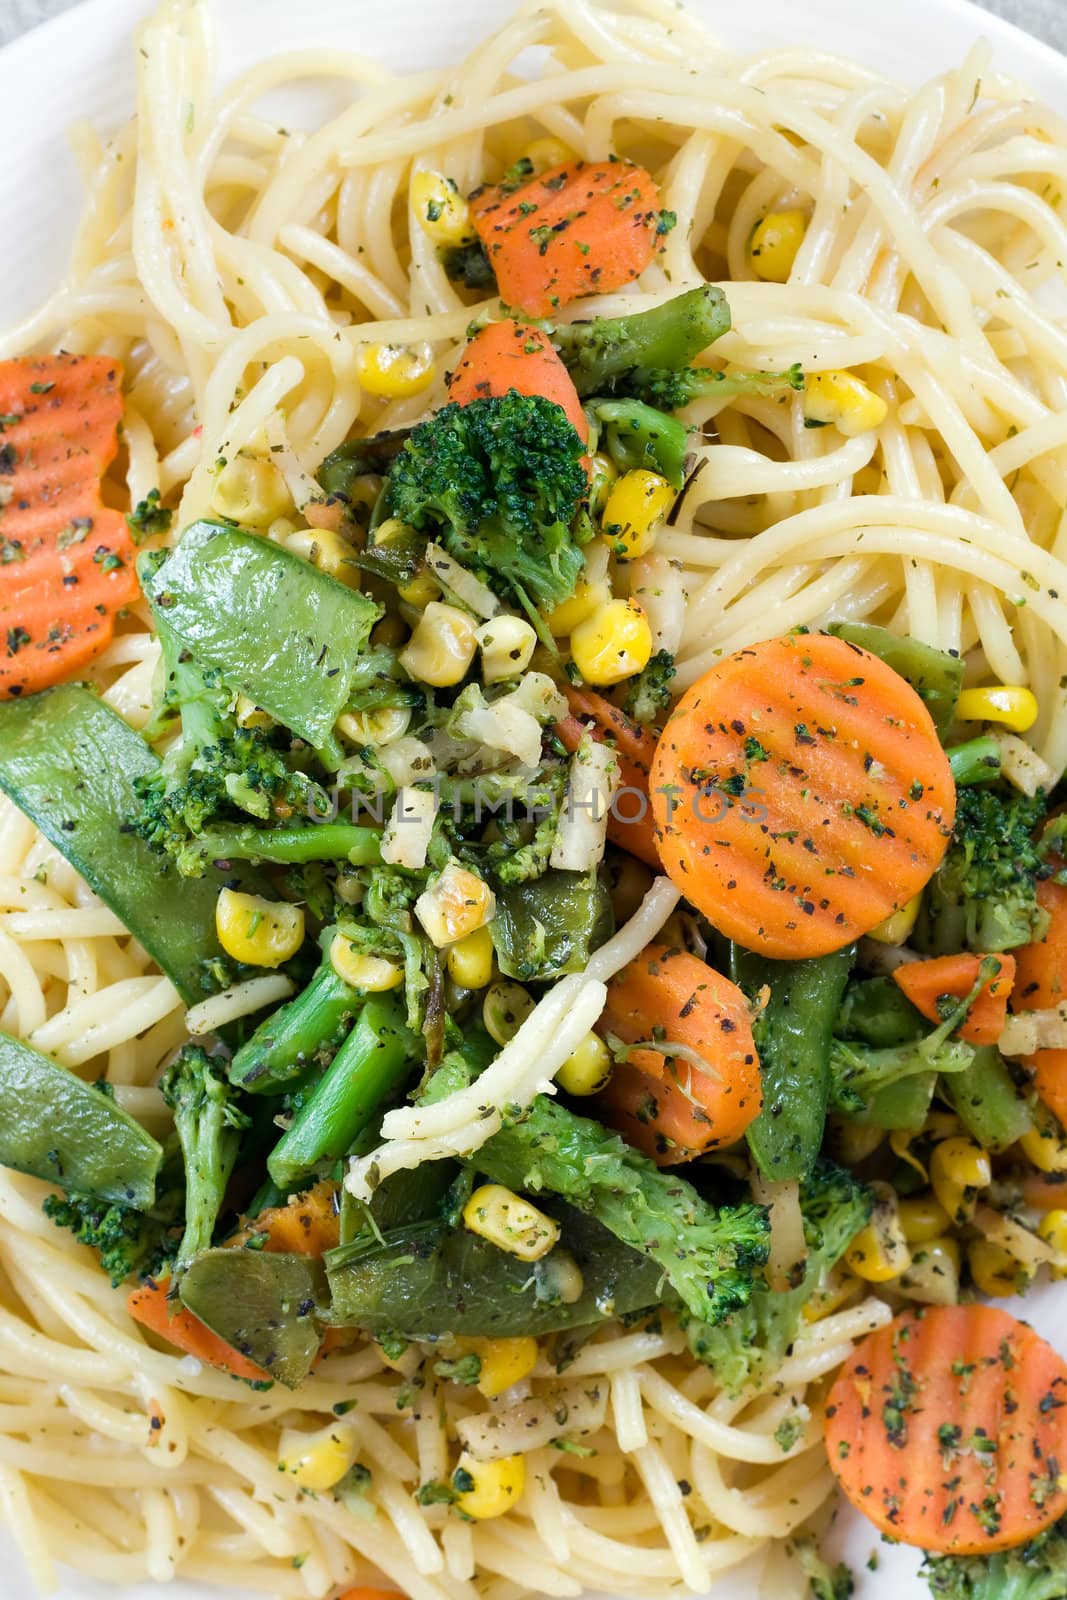 Spagheti with vegetables by ints